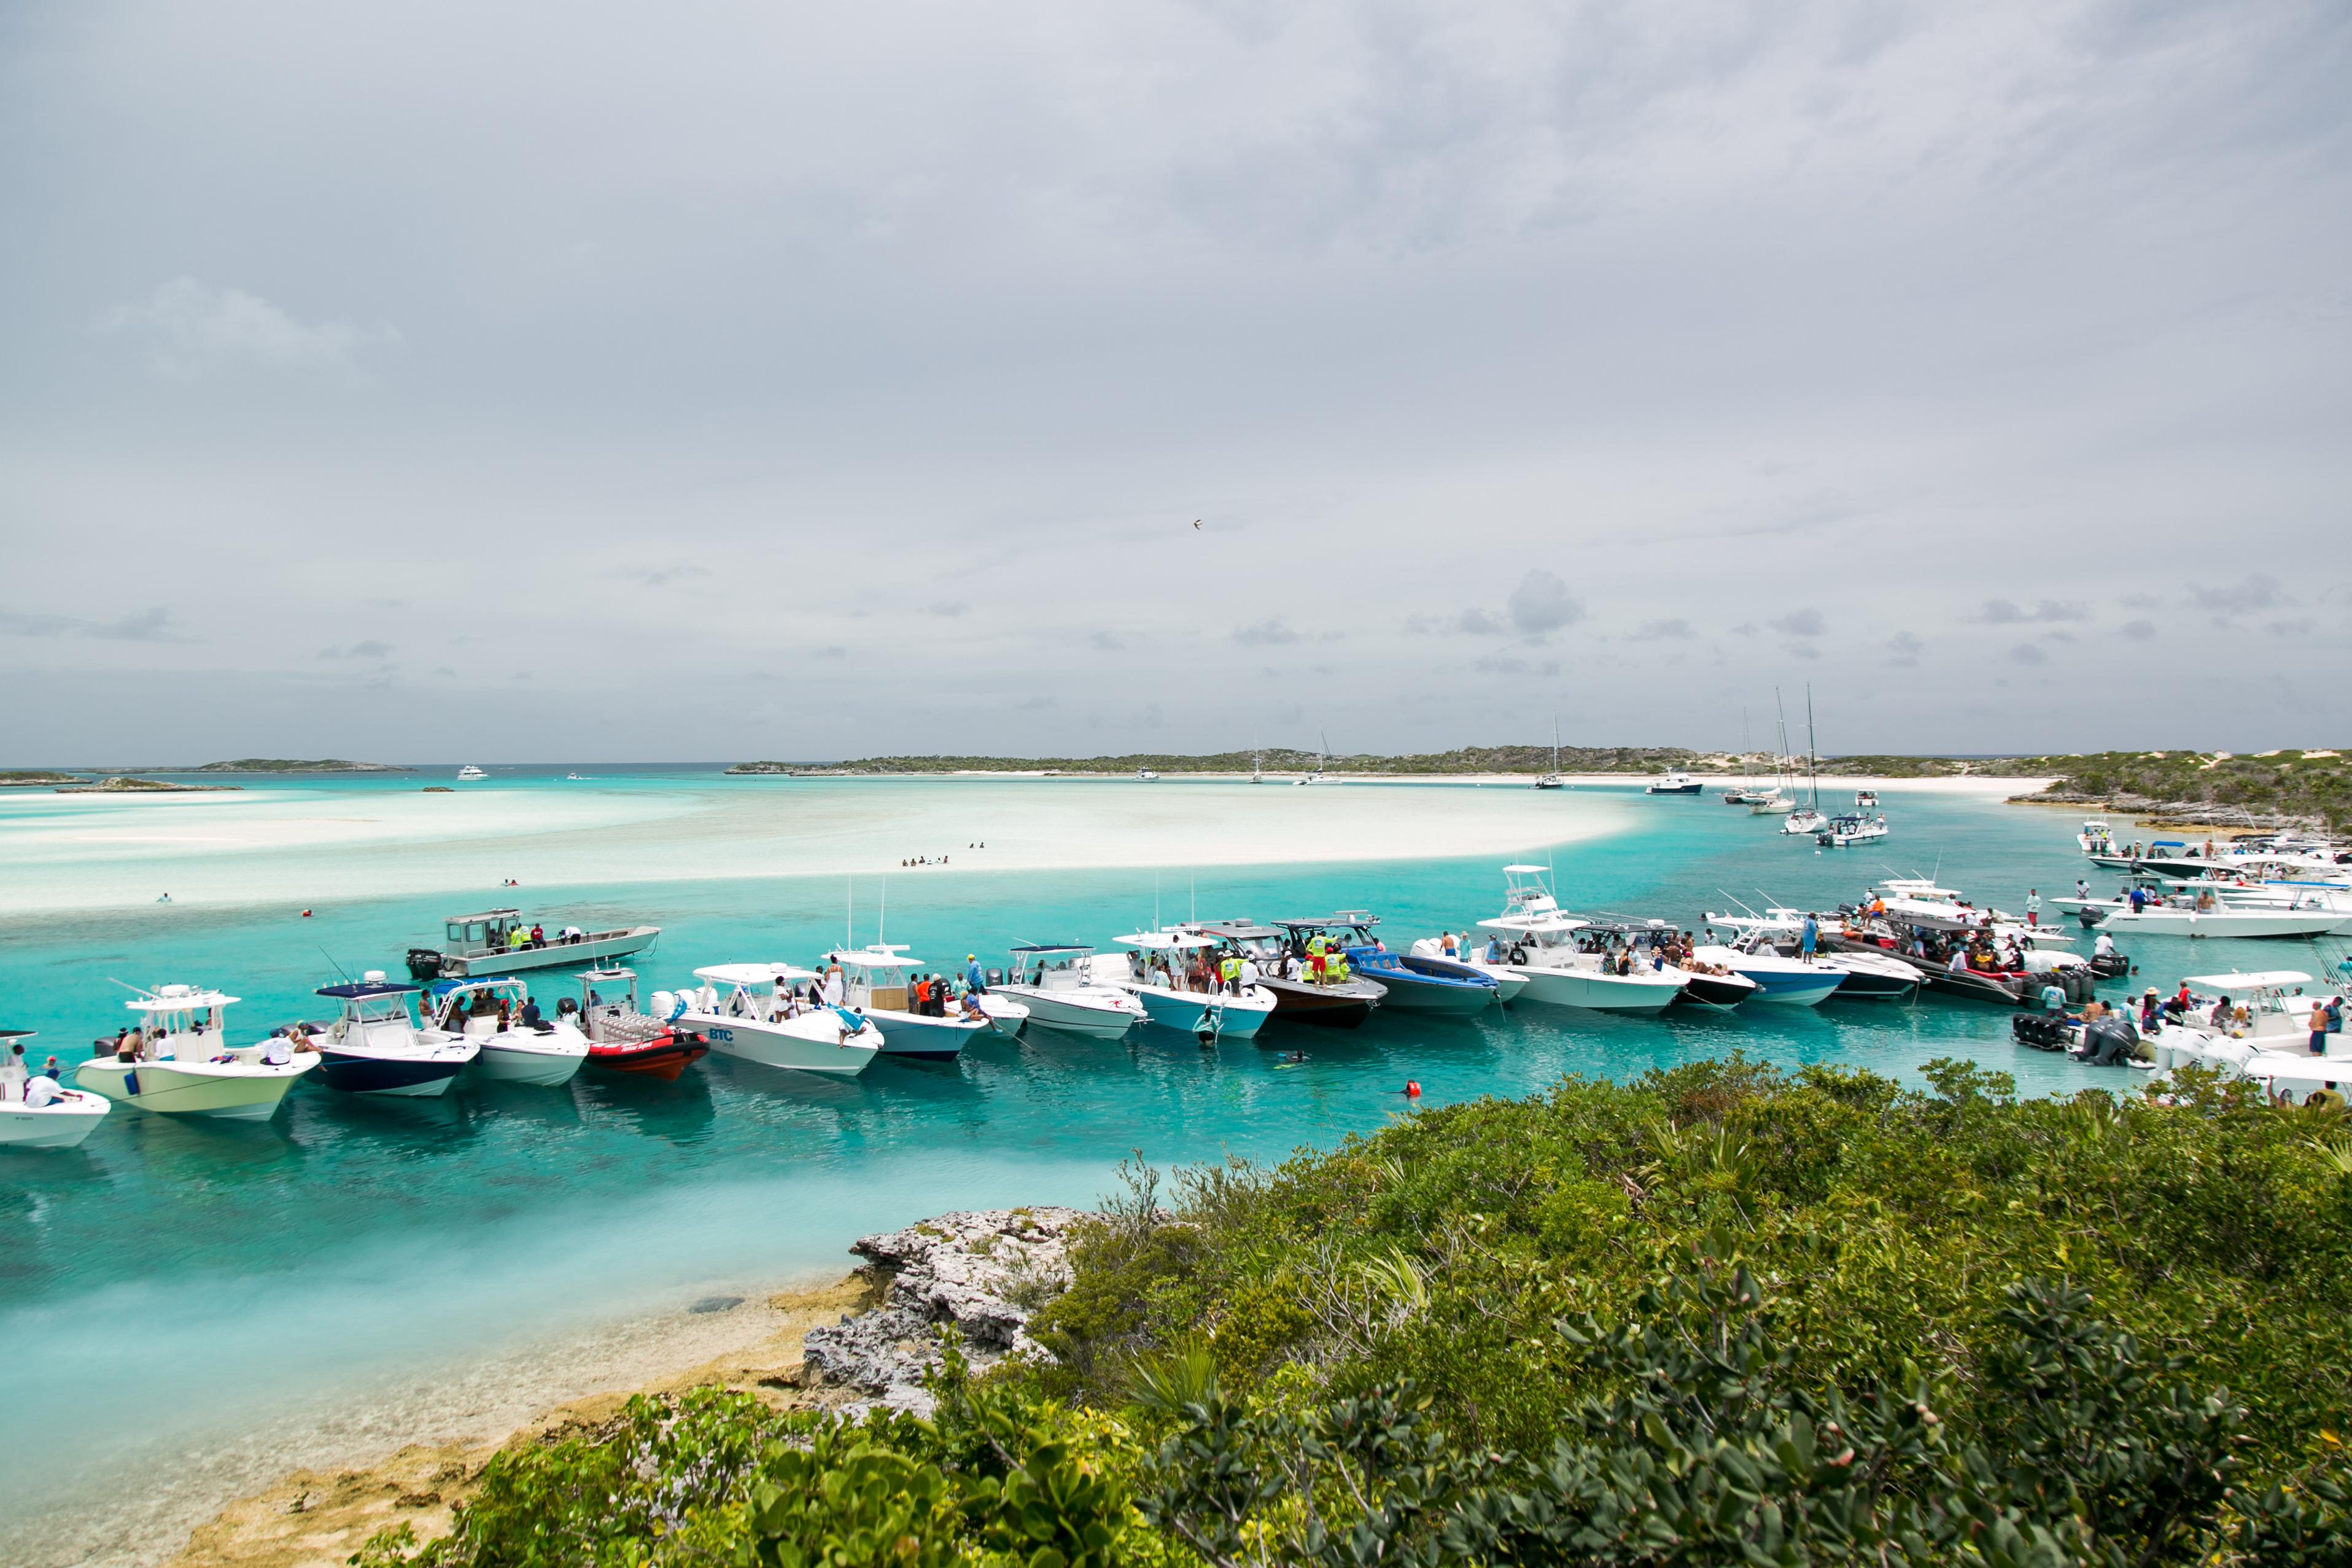 The Fourth Annual Bahamas Poker Run, in benefit of the Bahamas Nation Trust Exuma Cays Land & Sea Park, sets course for The Exumas on Saturday, June 1, 2019.